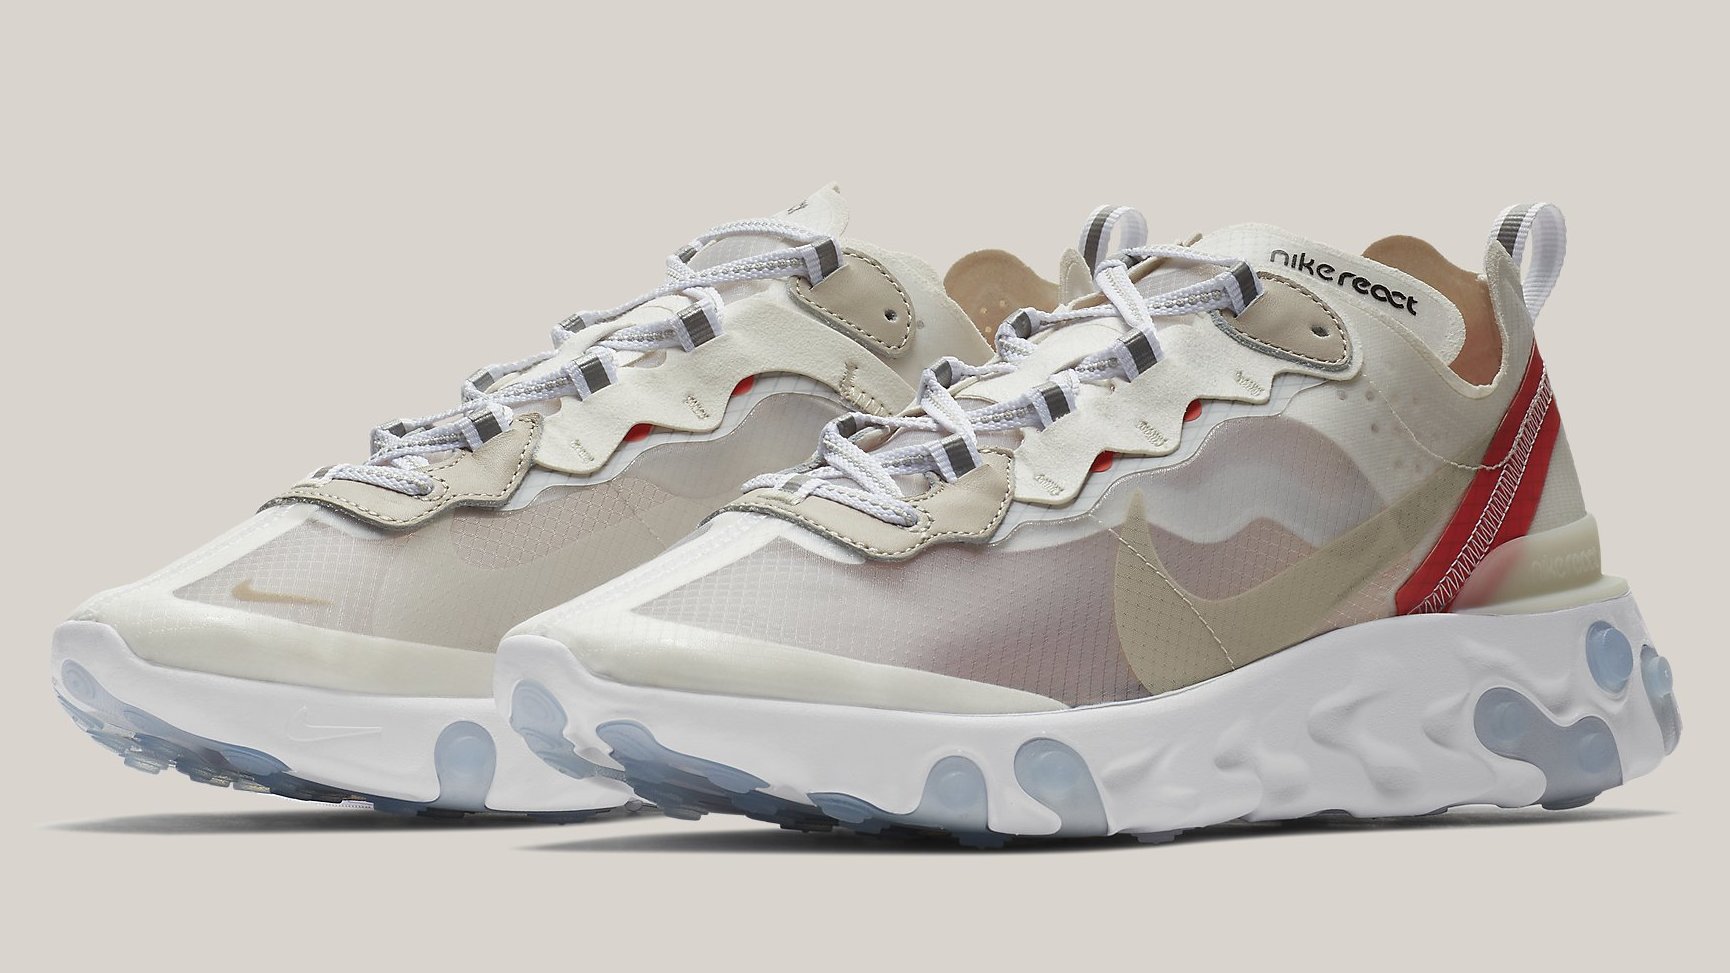 Hyret Udstyr tale Nike React Element 87 AQ1090-001 AQ1090-100 Release Date | Sole Collector